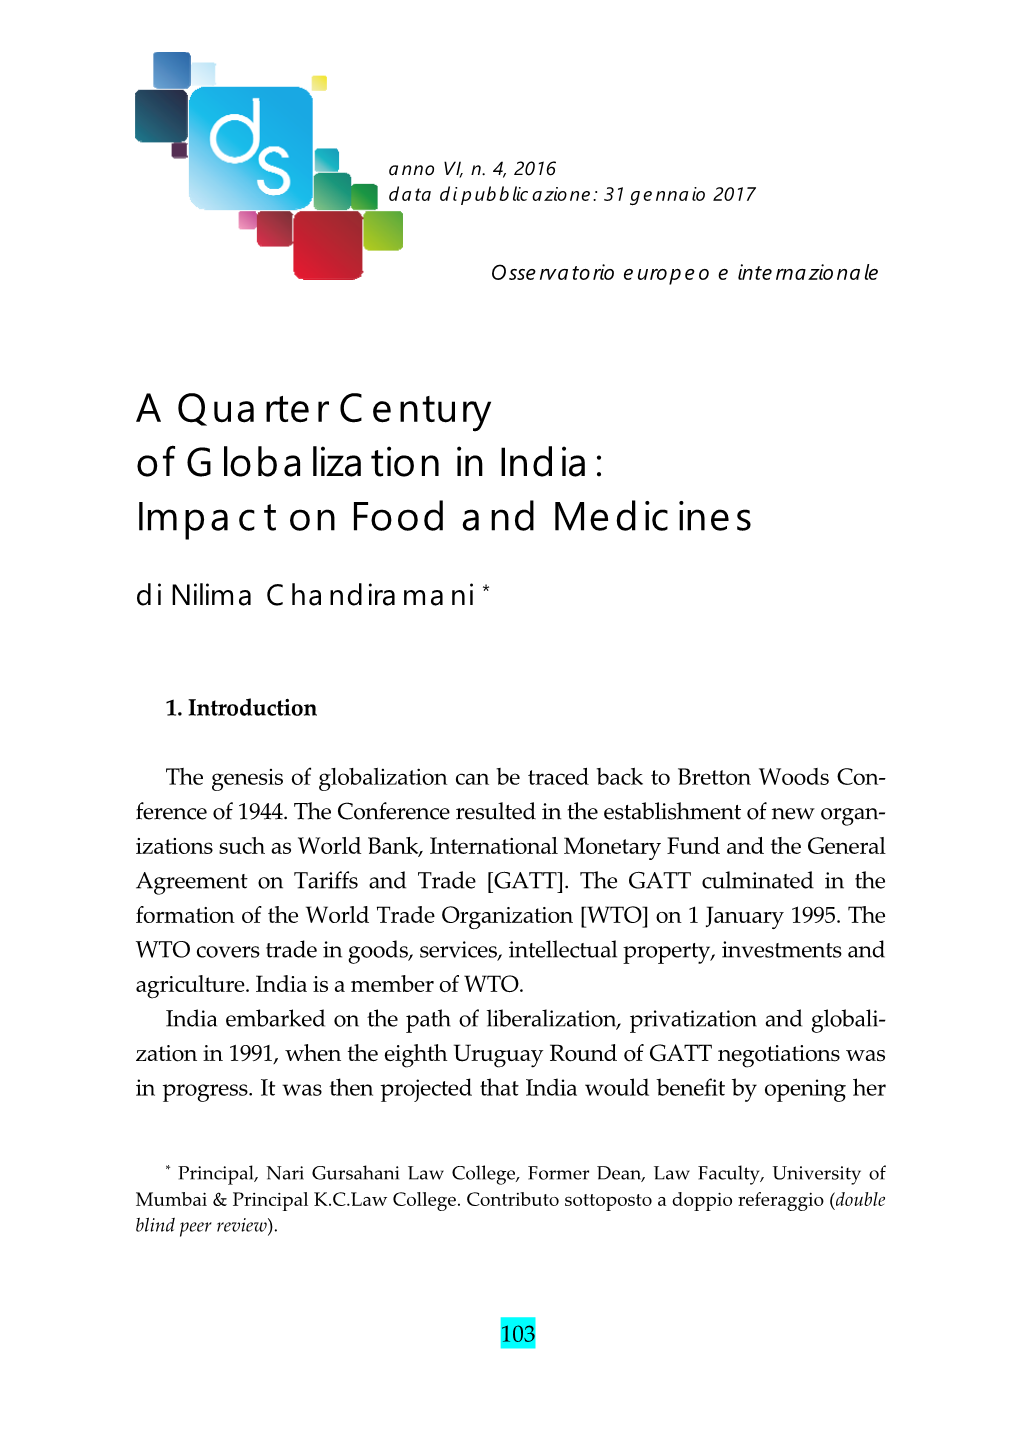 A Quarter Century of Globalization in India: Impact on Food and Medicines